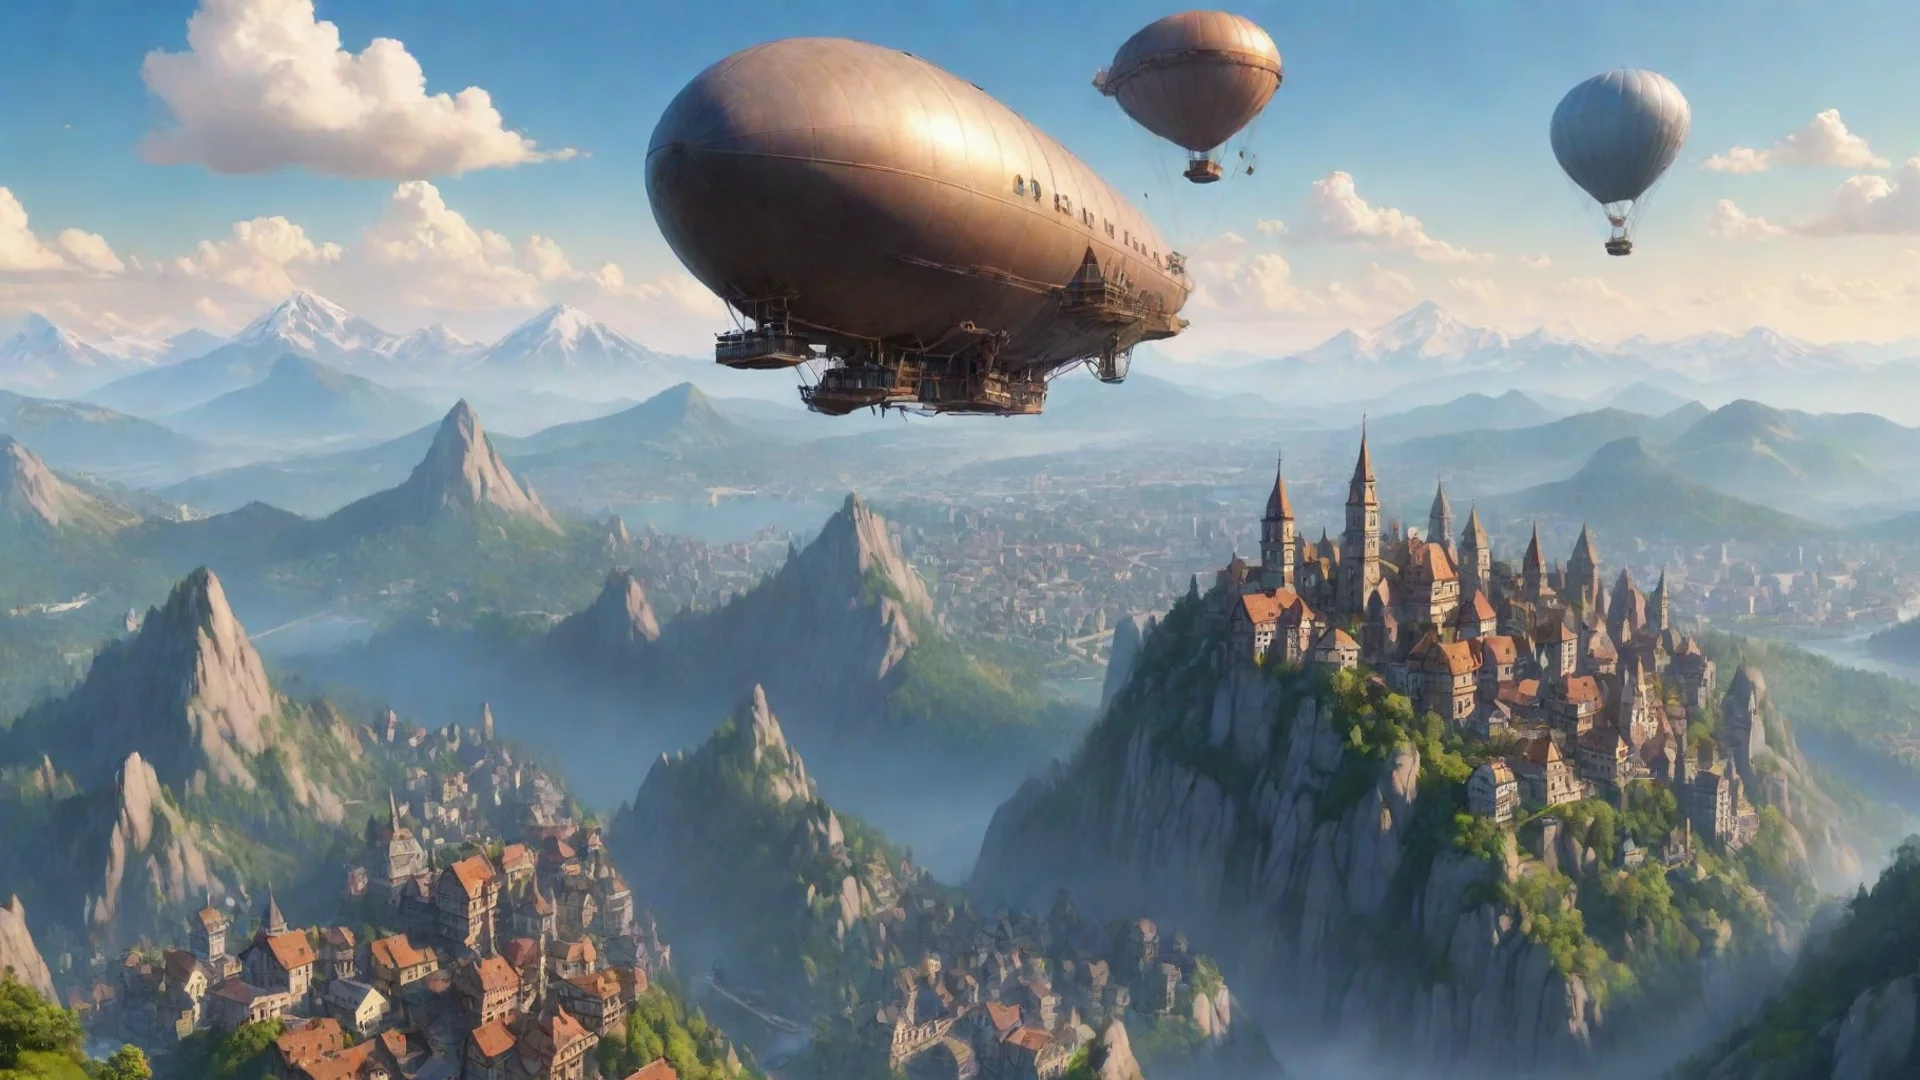 aiamazing amazing realistic cartoon city flying airship mountain top relaxing calm hd aesthetic peace awesome portrait 2 wide